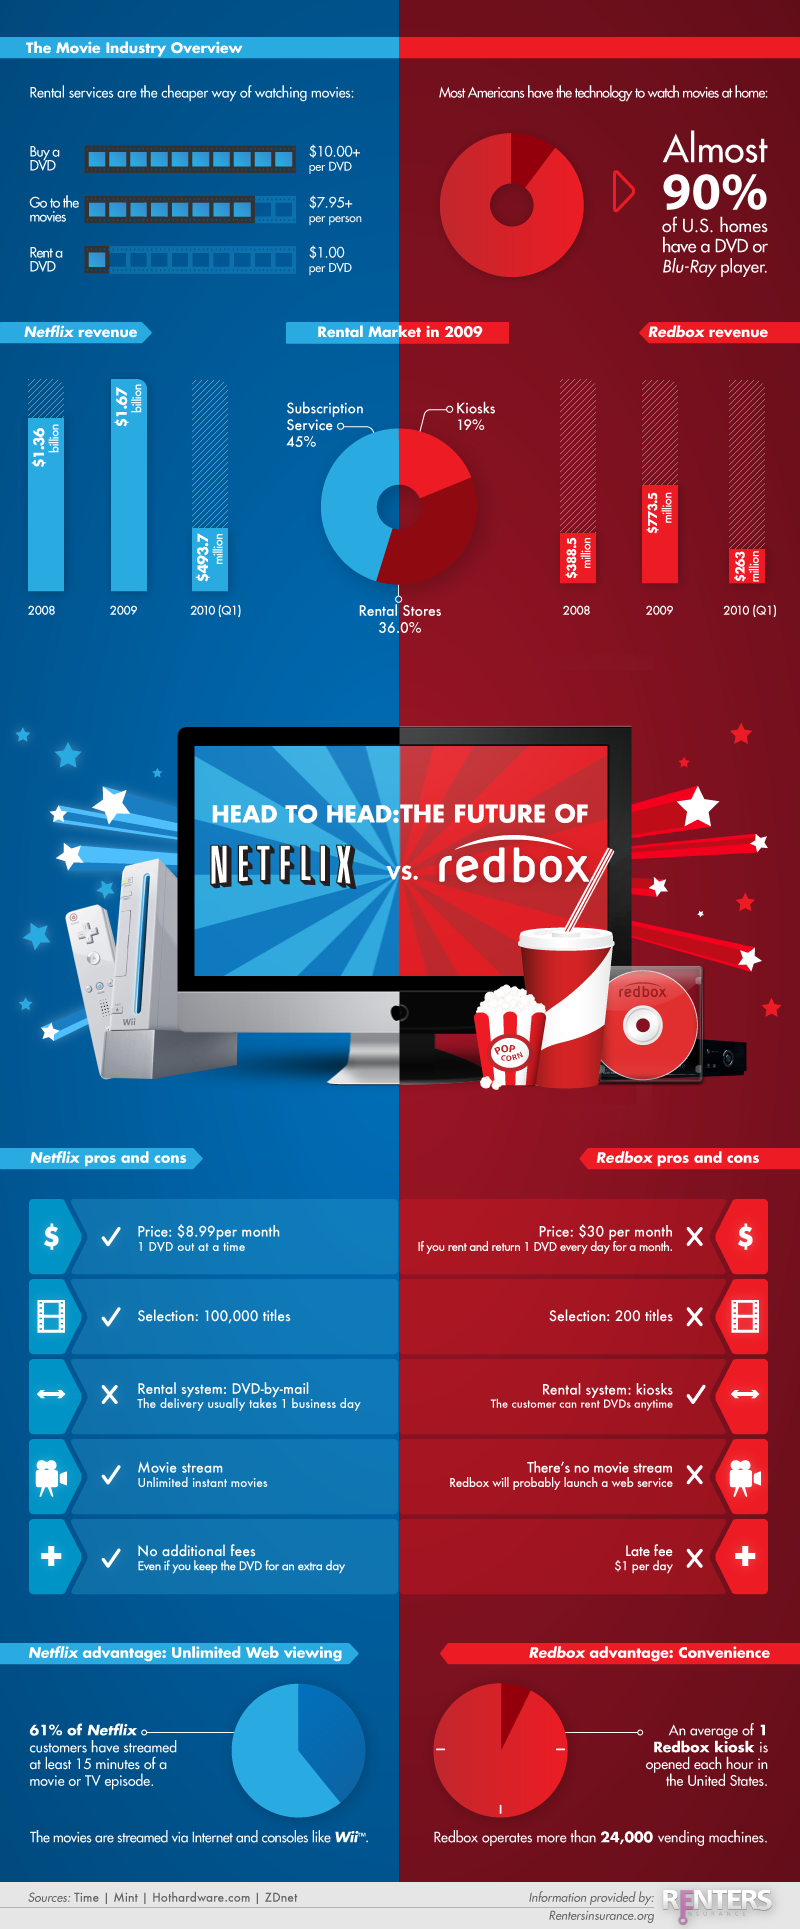 20+ Comparison Infographic Templates and Data Visualization Tips - Venngage